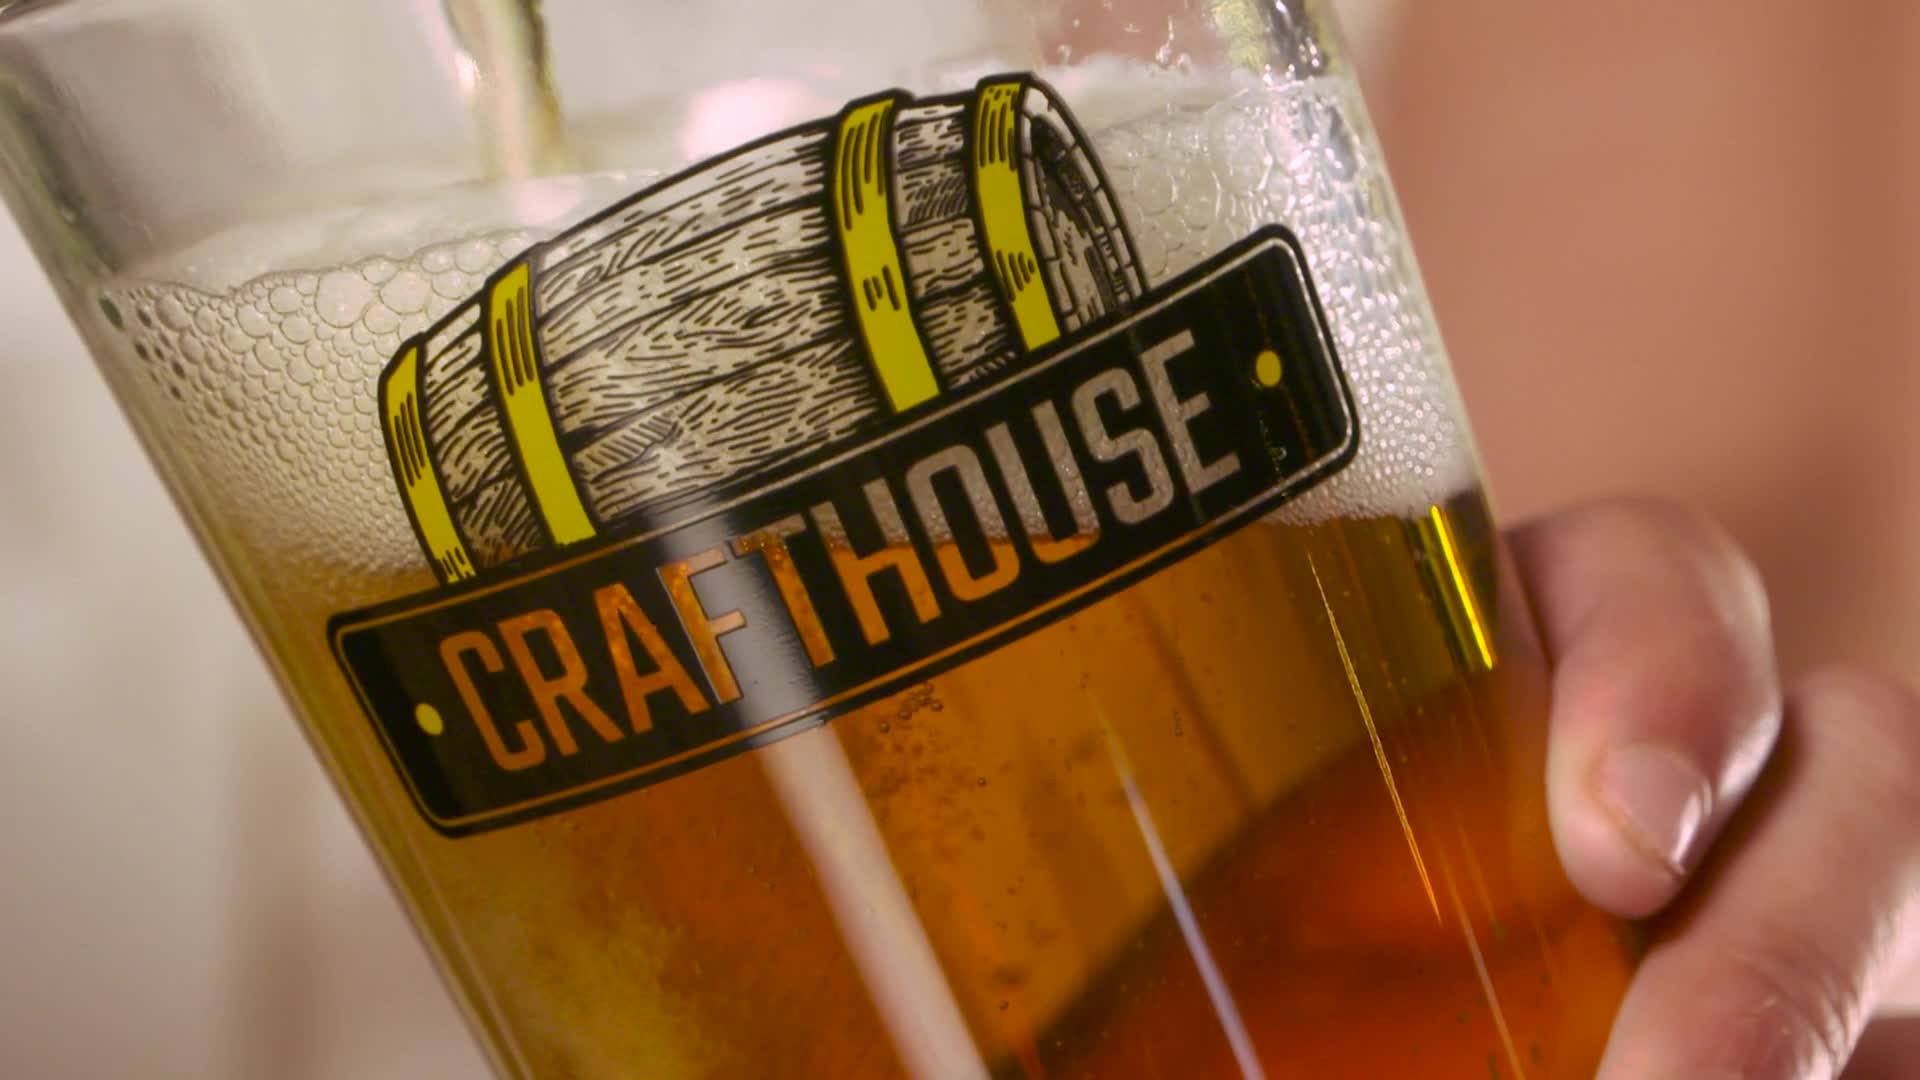 Crafthouse Fairfax Reopening